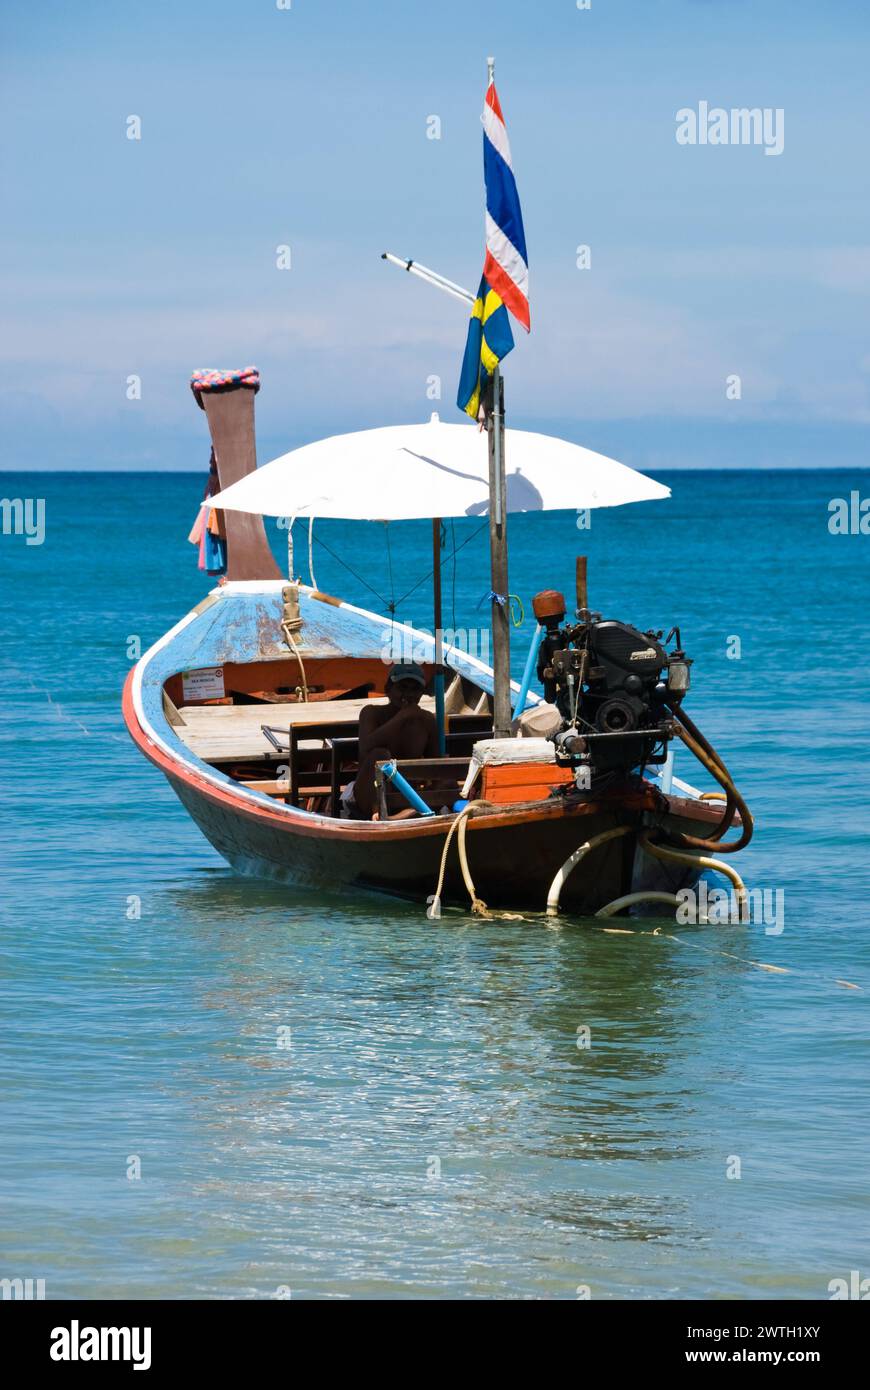 A small boat sails on a sunny day in Phuket, Thailand Stock Photo